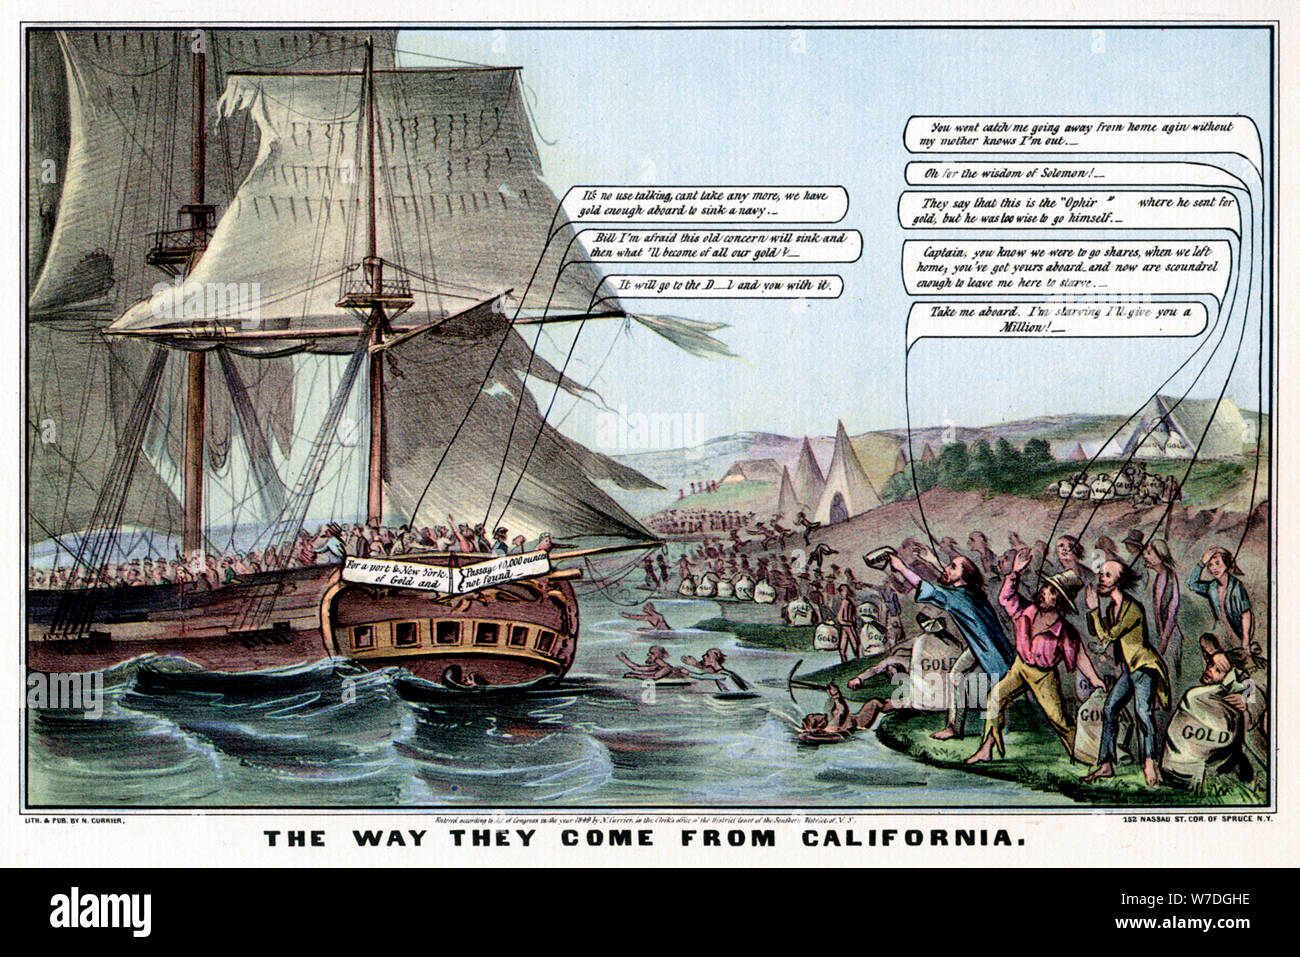 'The Way They Come From California', 1849 (1937).Artist: Nathaniel Currier Stock Photo